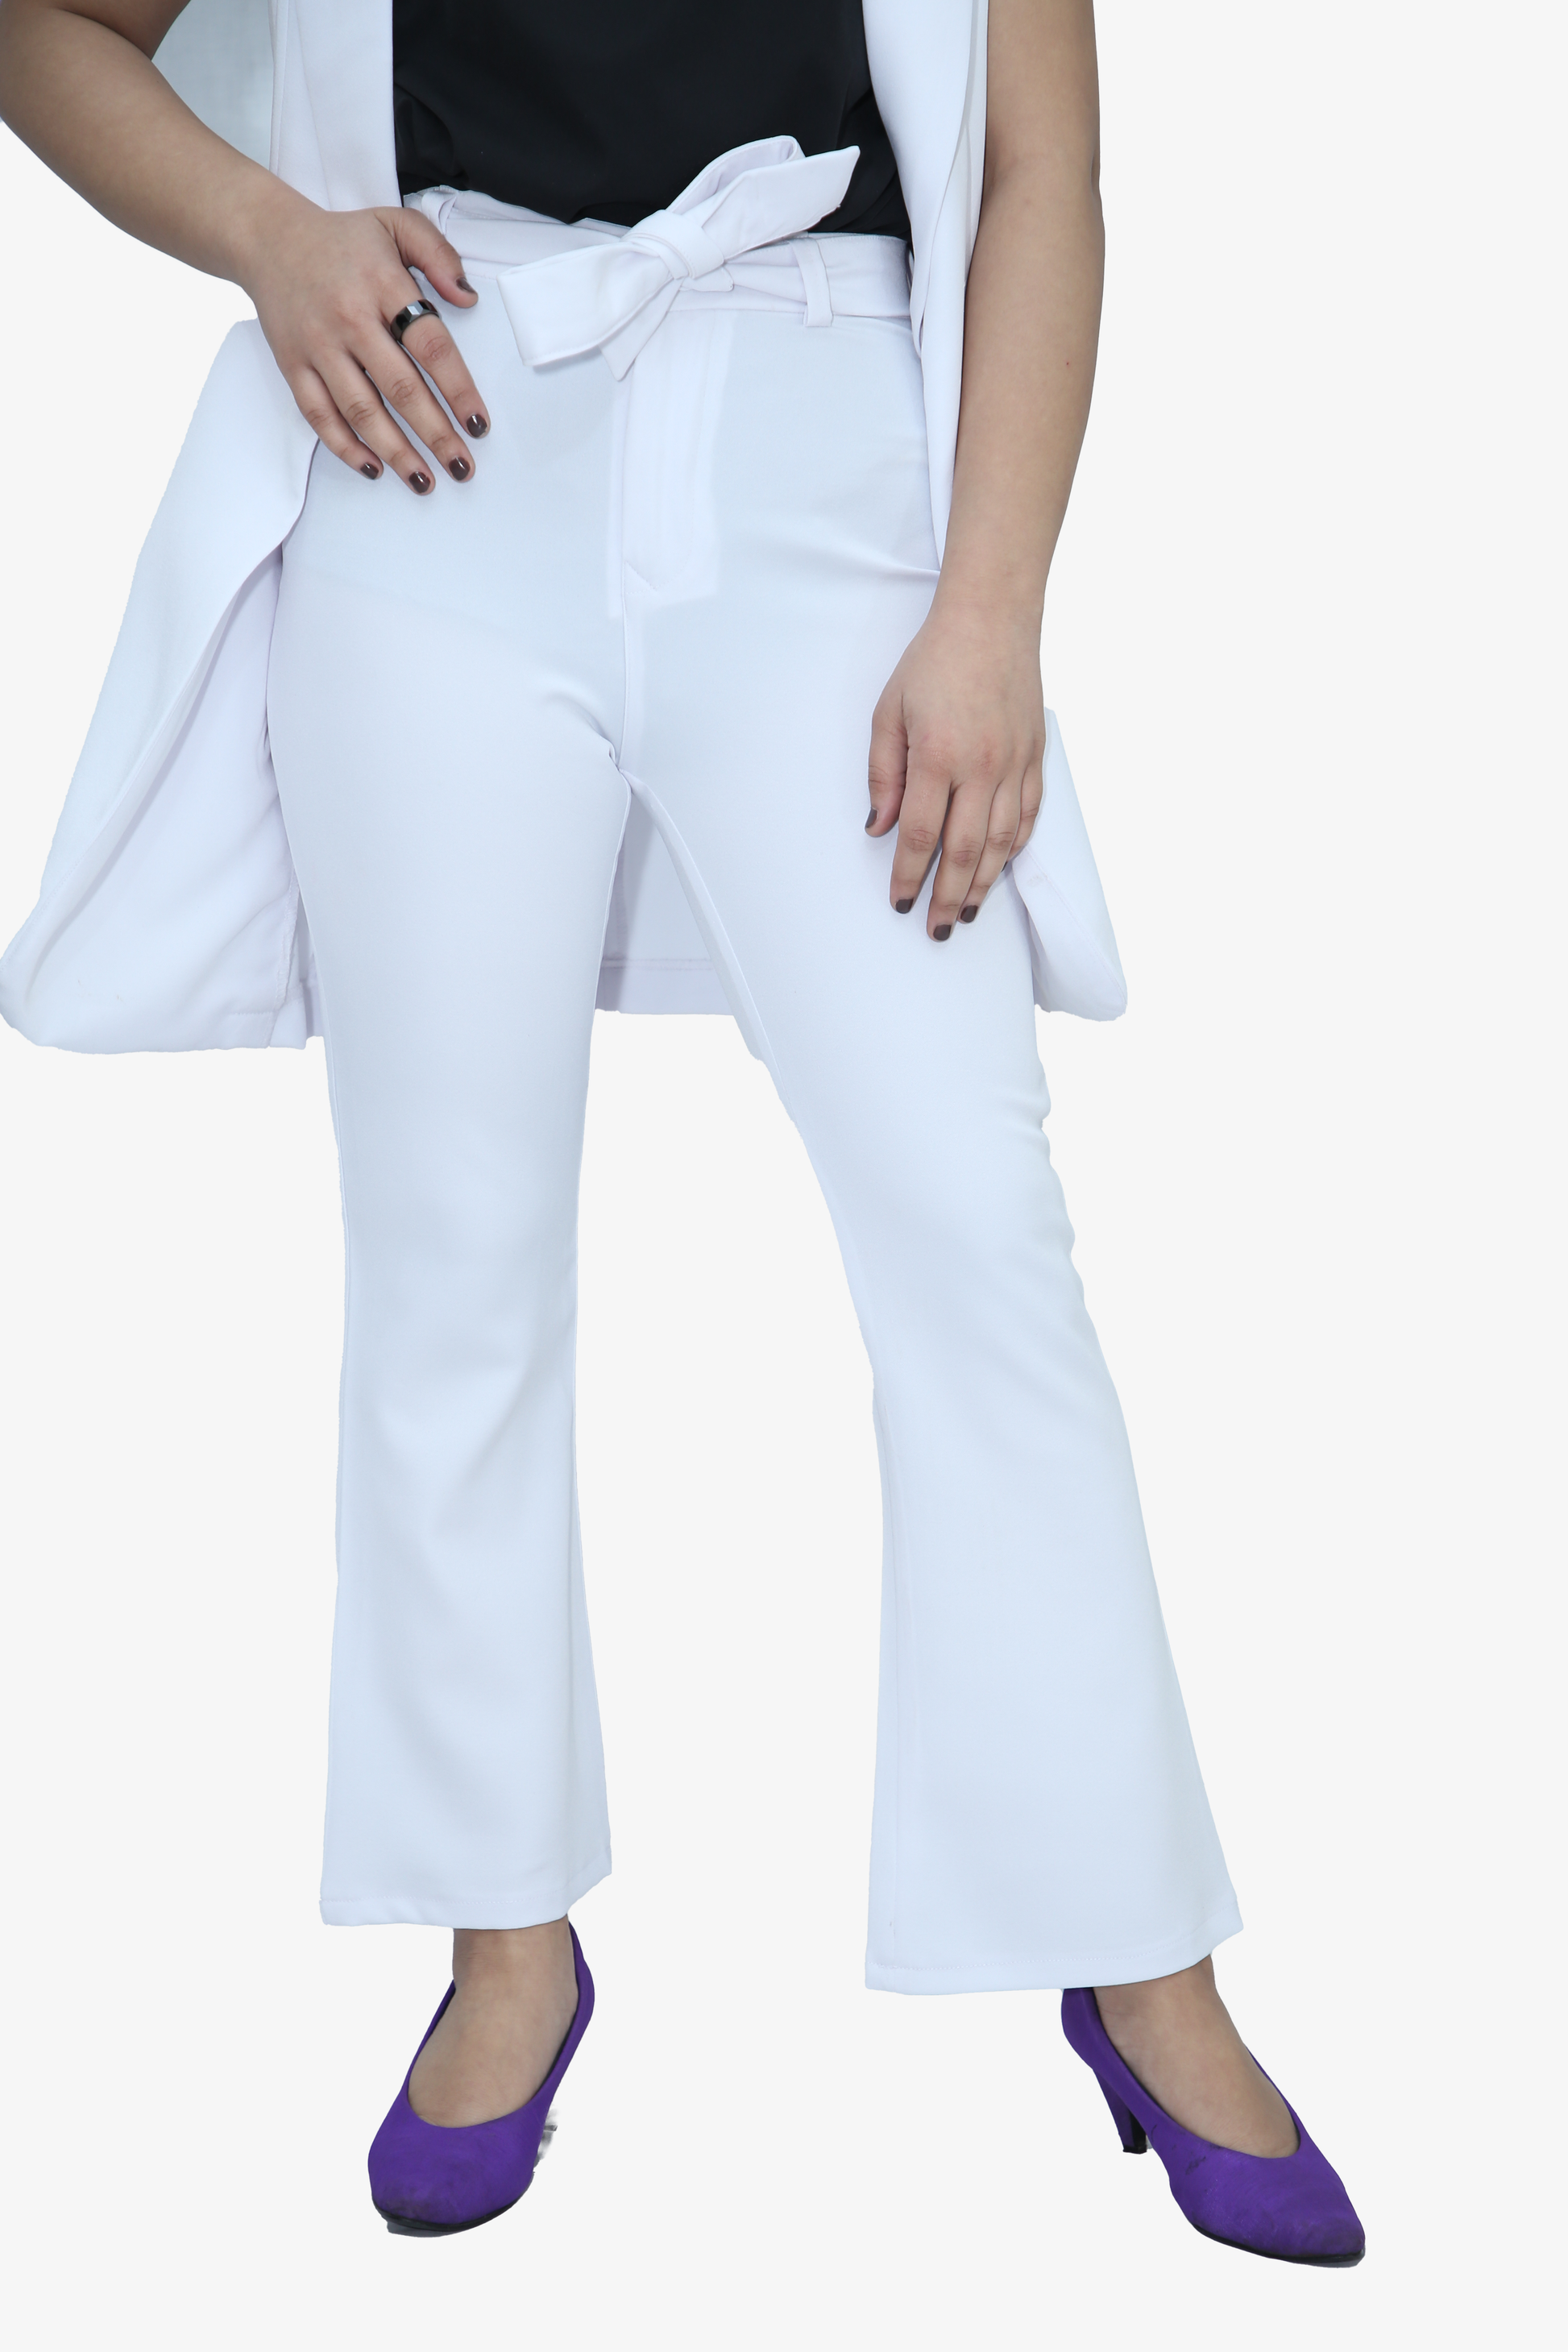 Flared pant in white polyester